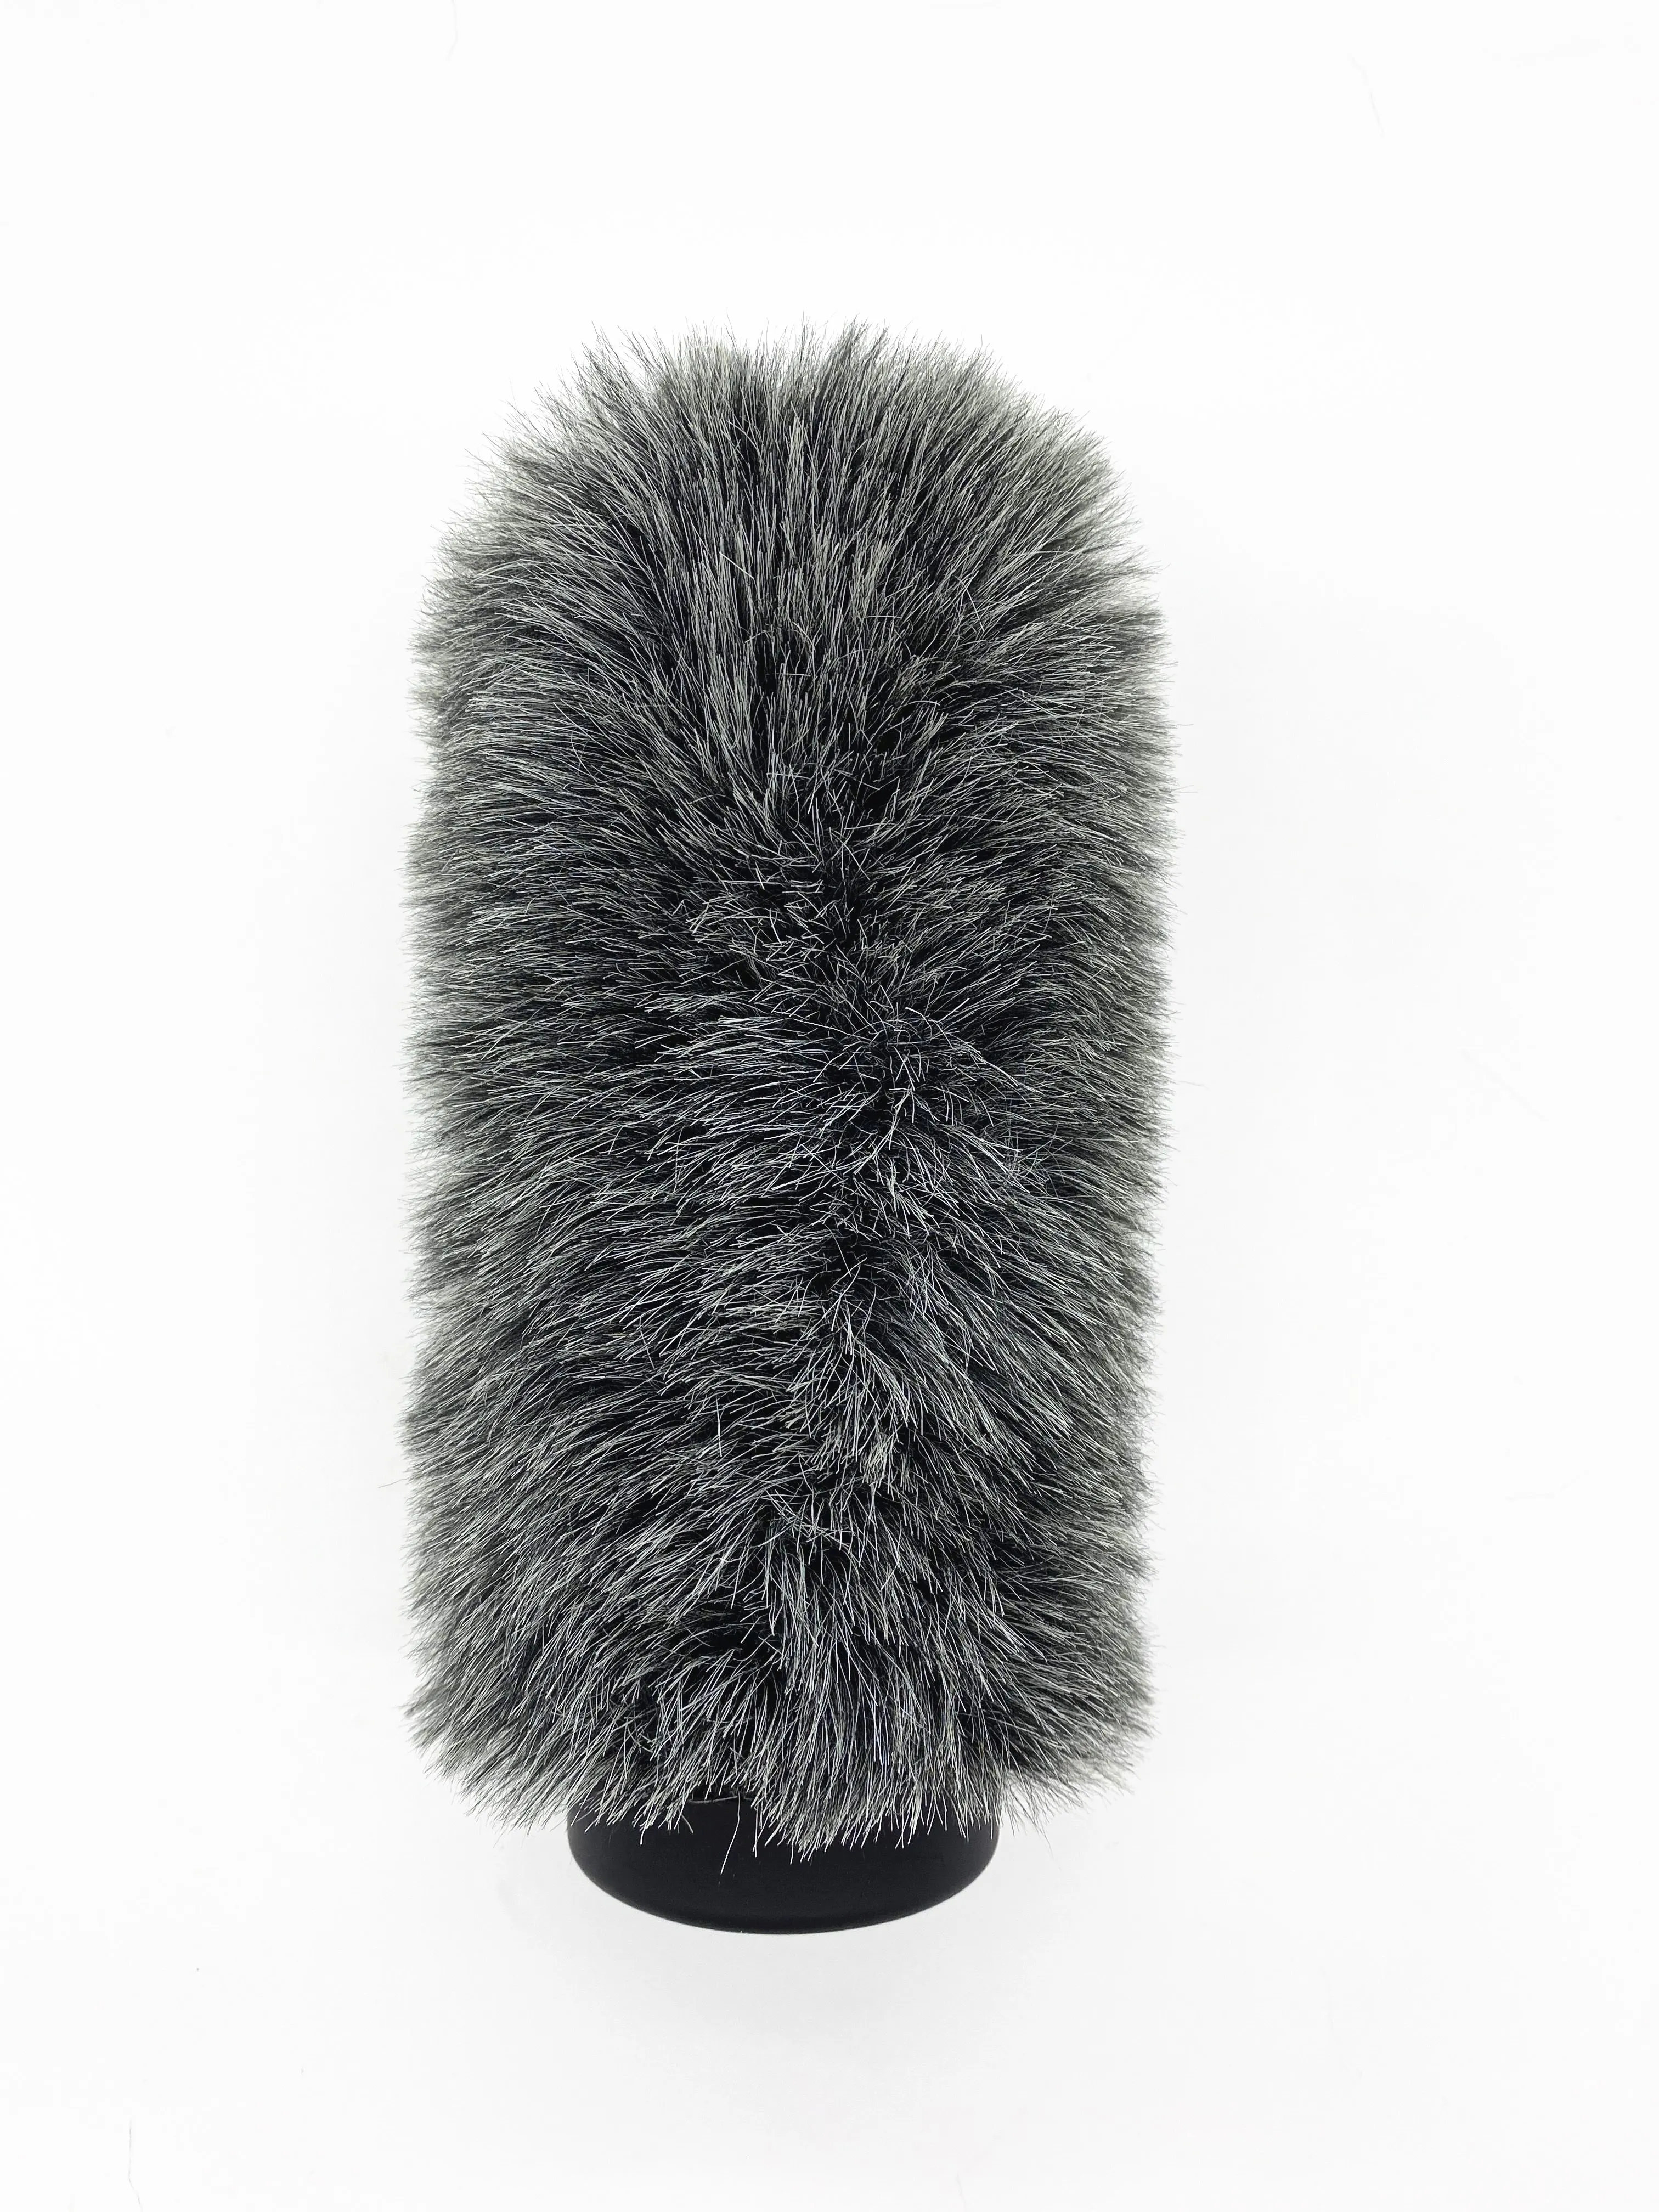 Dead cat Slip-on windshield Integral Microphones fur cover For Interview Microphone Outdoor Shooting Mic Furry Windshield Cover images - 6